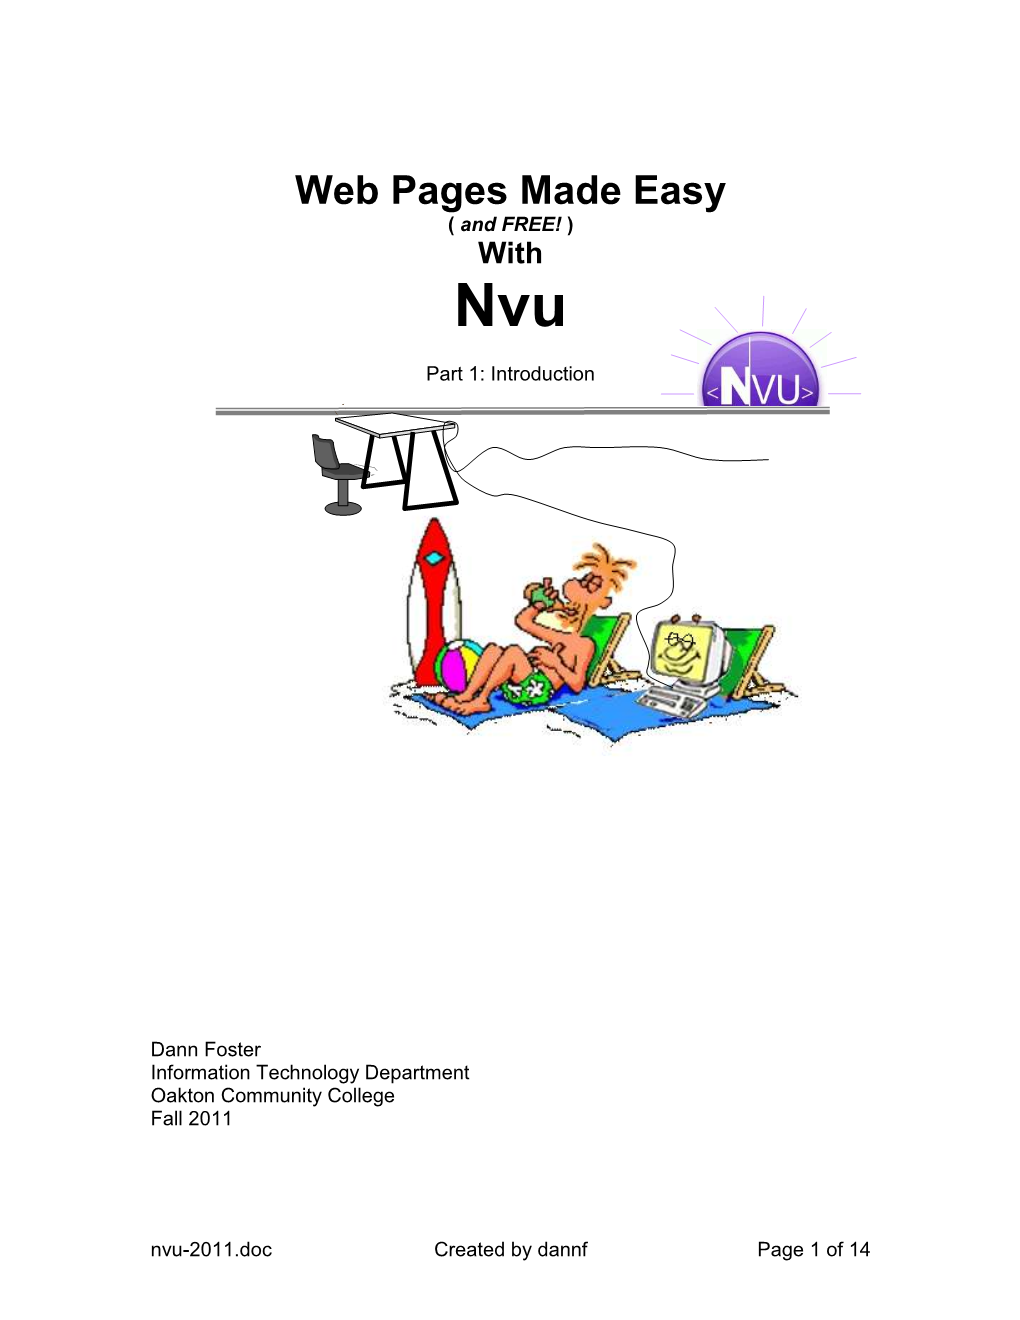 Web Pages Made Easy ( and FREE! ) with Nvu